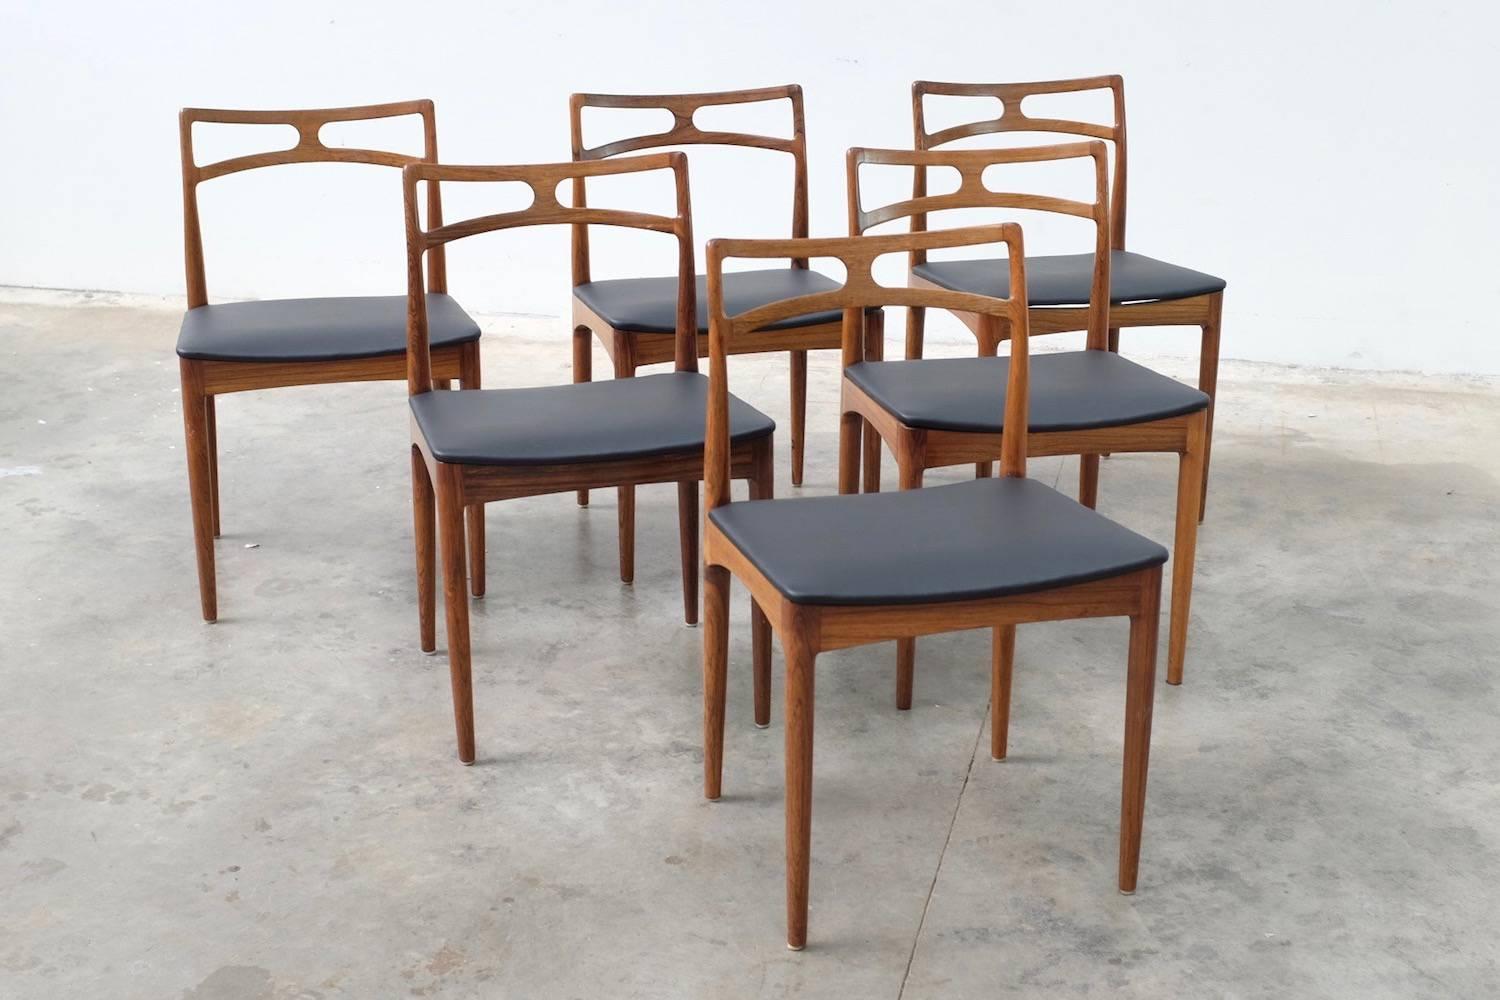 Set of six Johannes Andersen for Christian Lindeberg #94 dining chairs in rosewood.

Wonderful, Classic, sought after. These chairs are in original condition, never restored - just reupholstered in simple black leather. 

In excellent structural